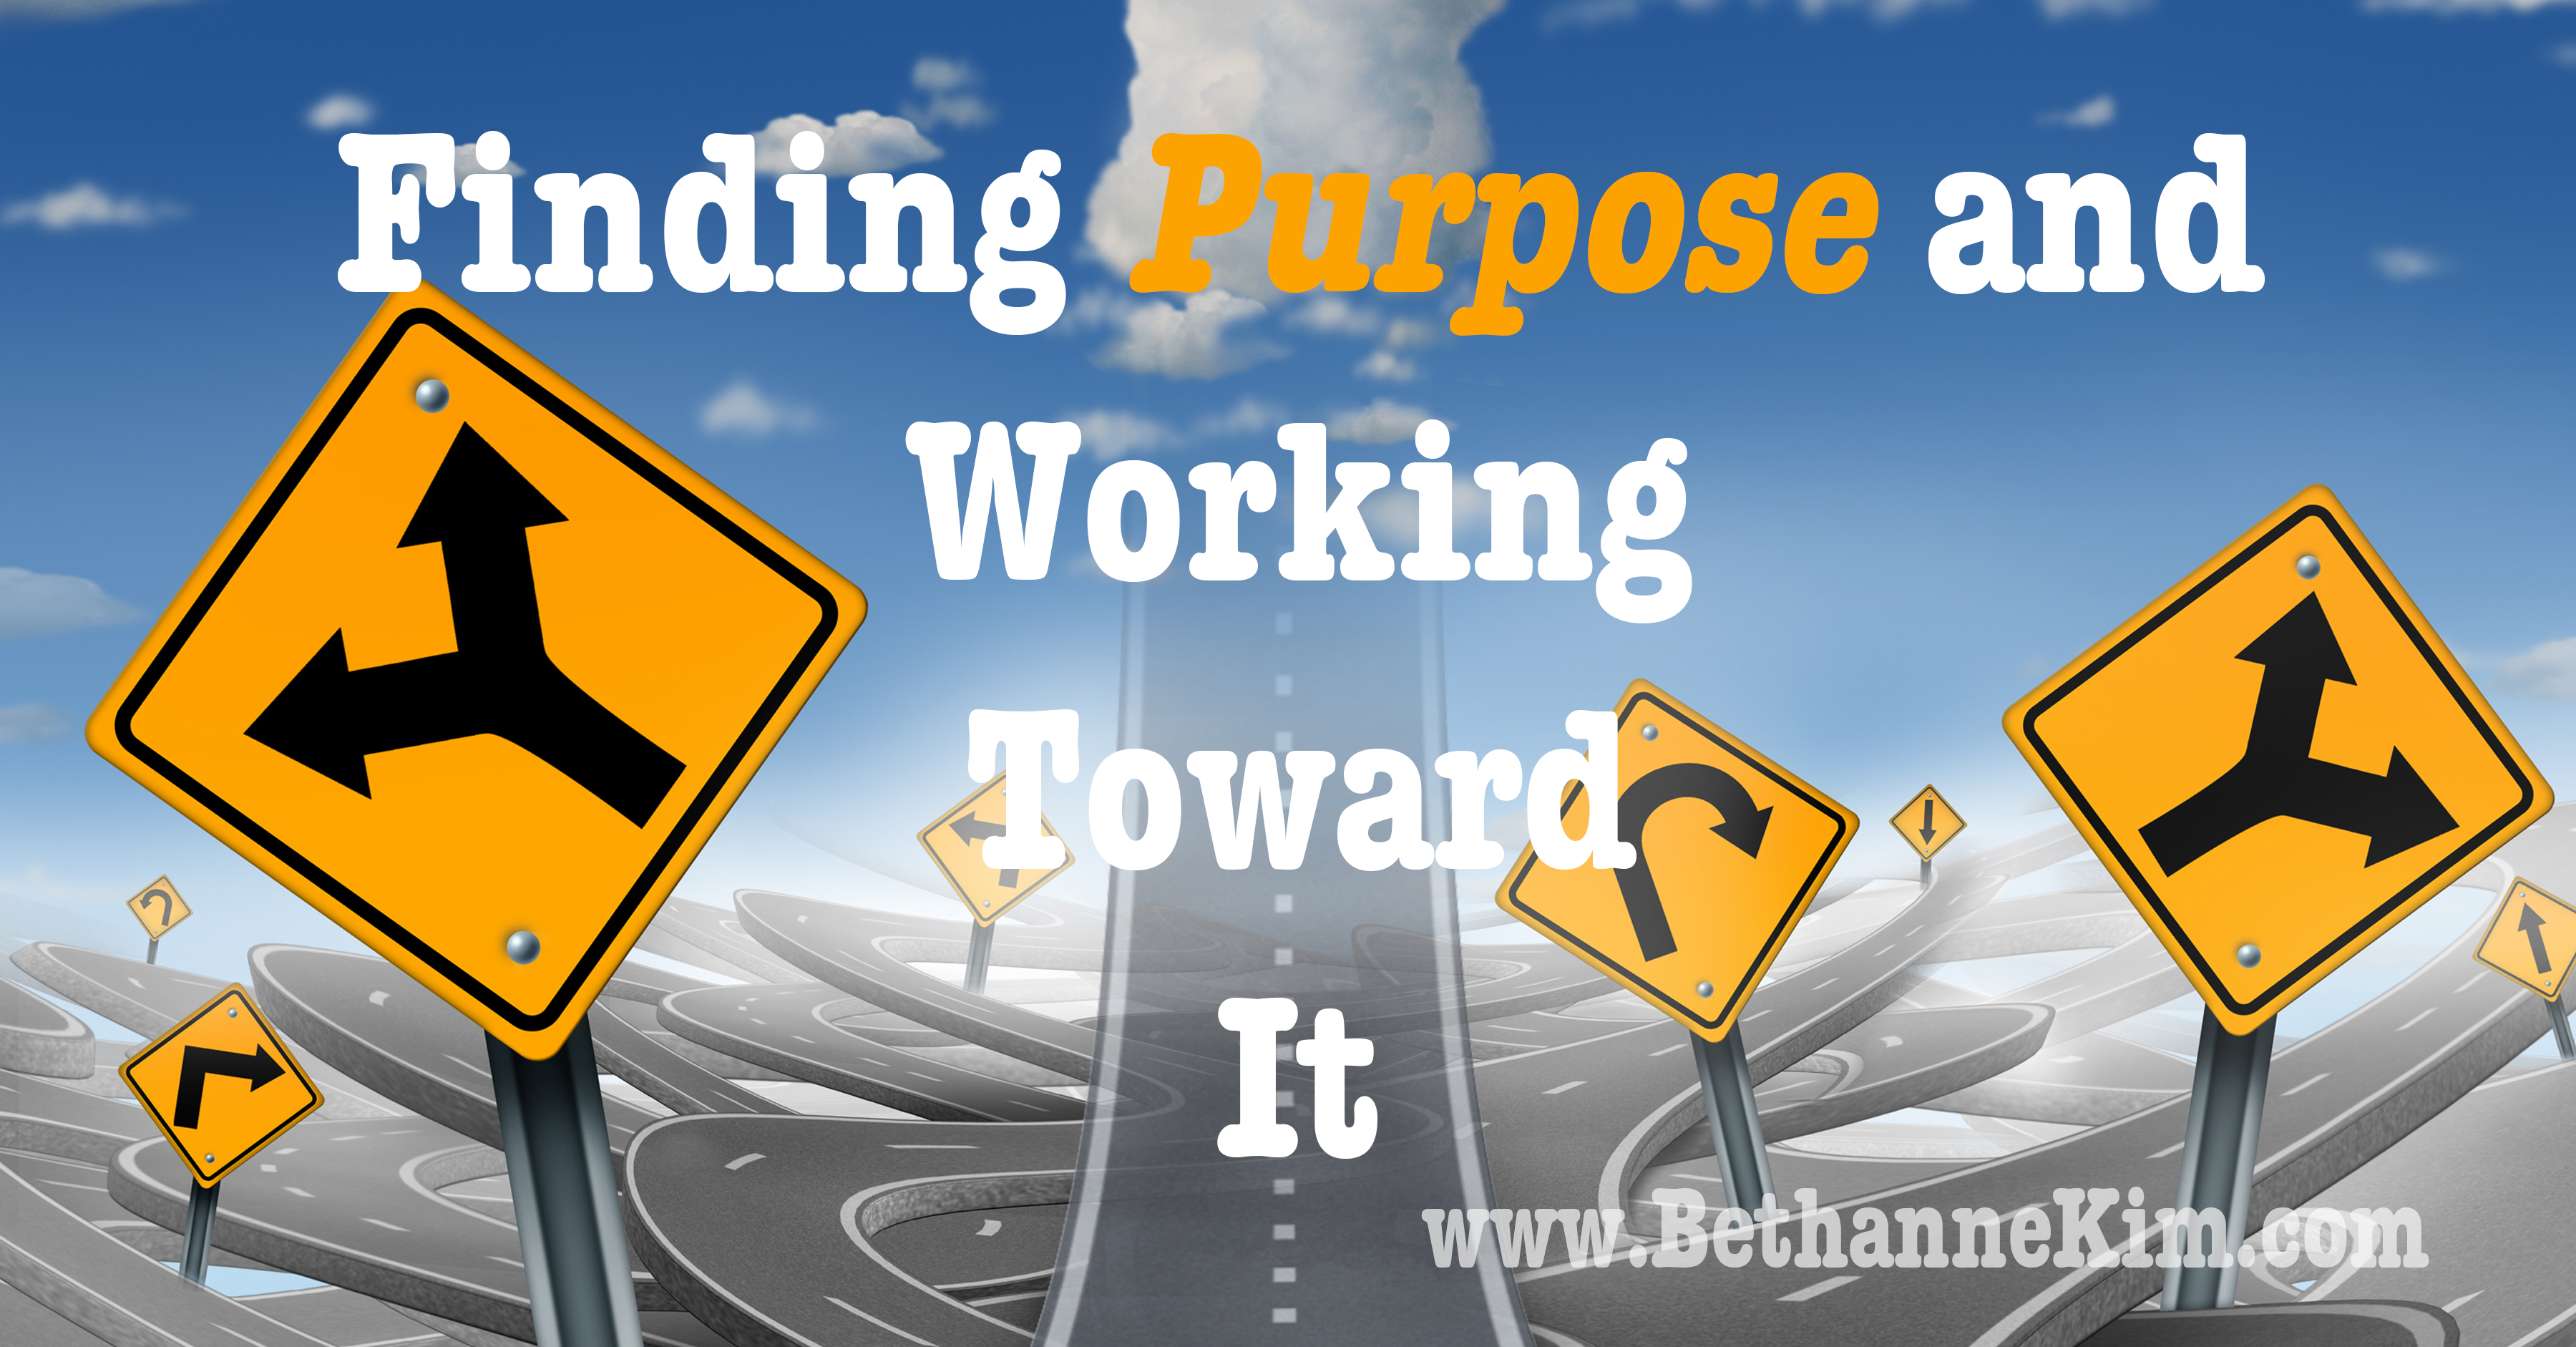 Finding Purpose and Working Toward It